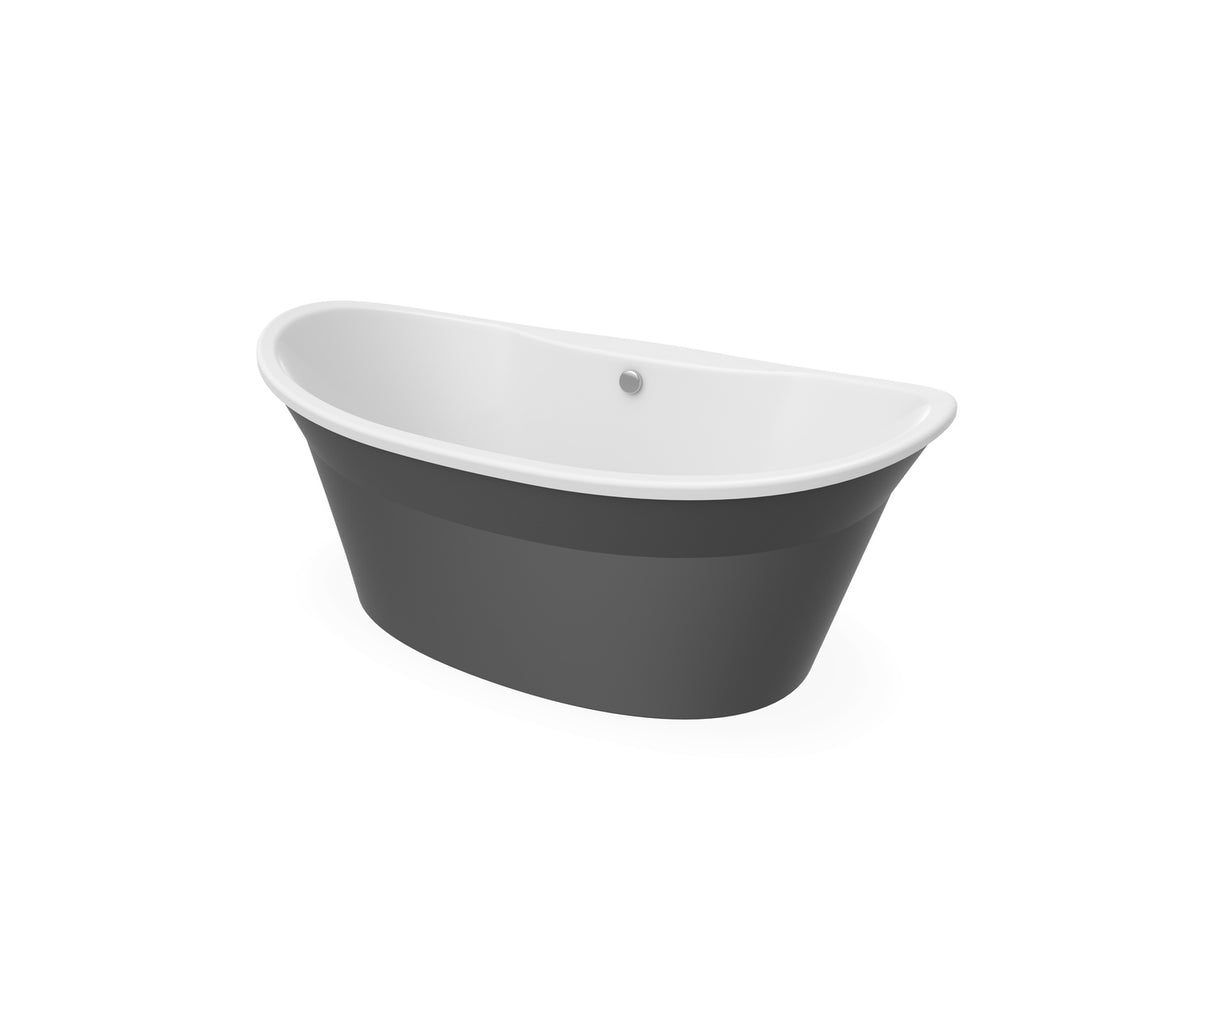 MAAX 106151-000-002-129 Orchestra 6636 AcrylX Freestanding Center Drain Bathtub in White with Thundey Grey Skirt